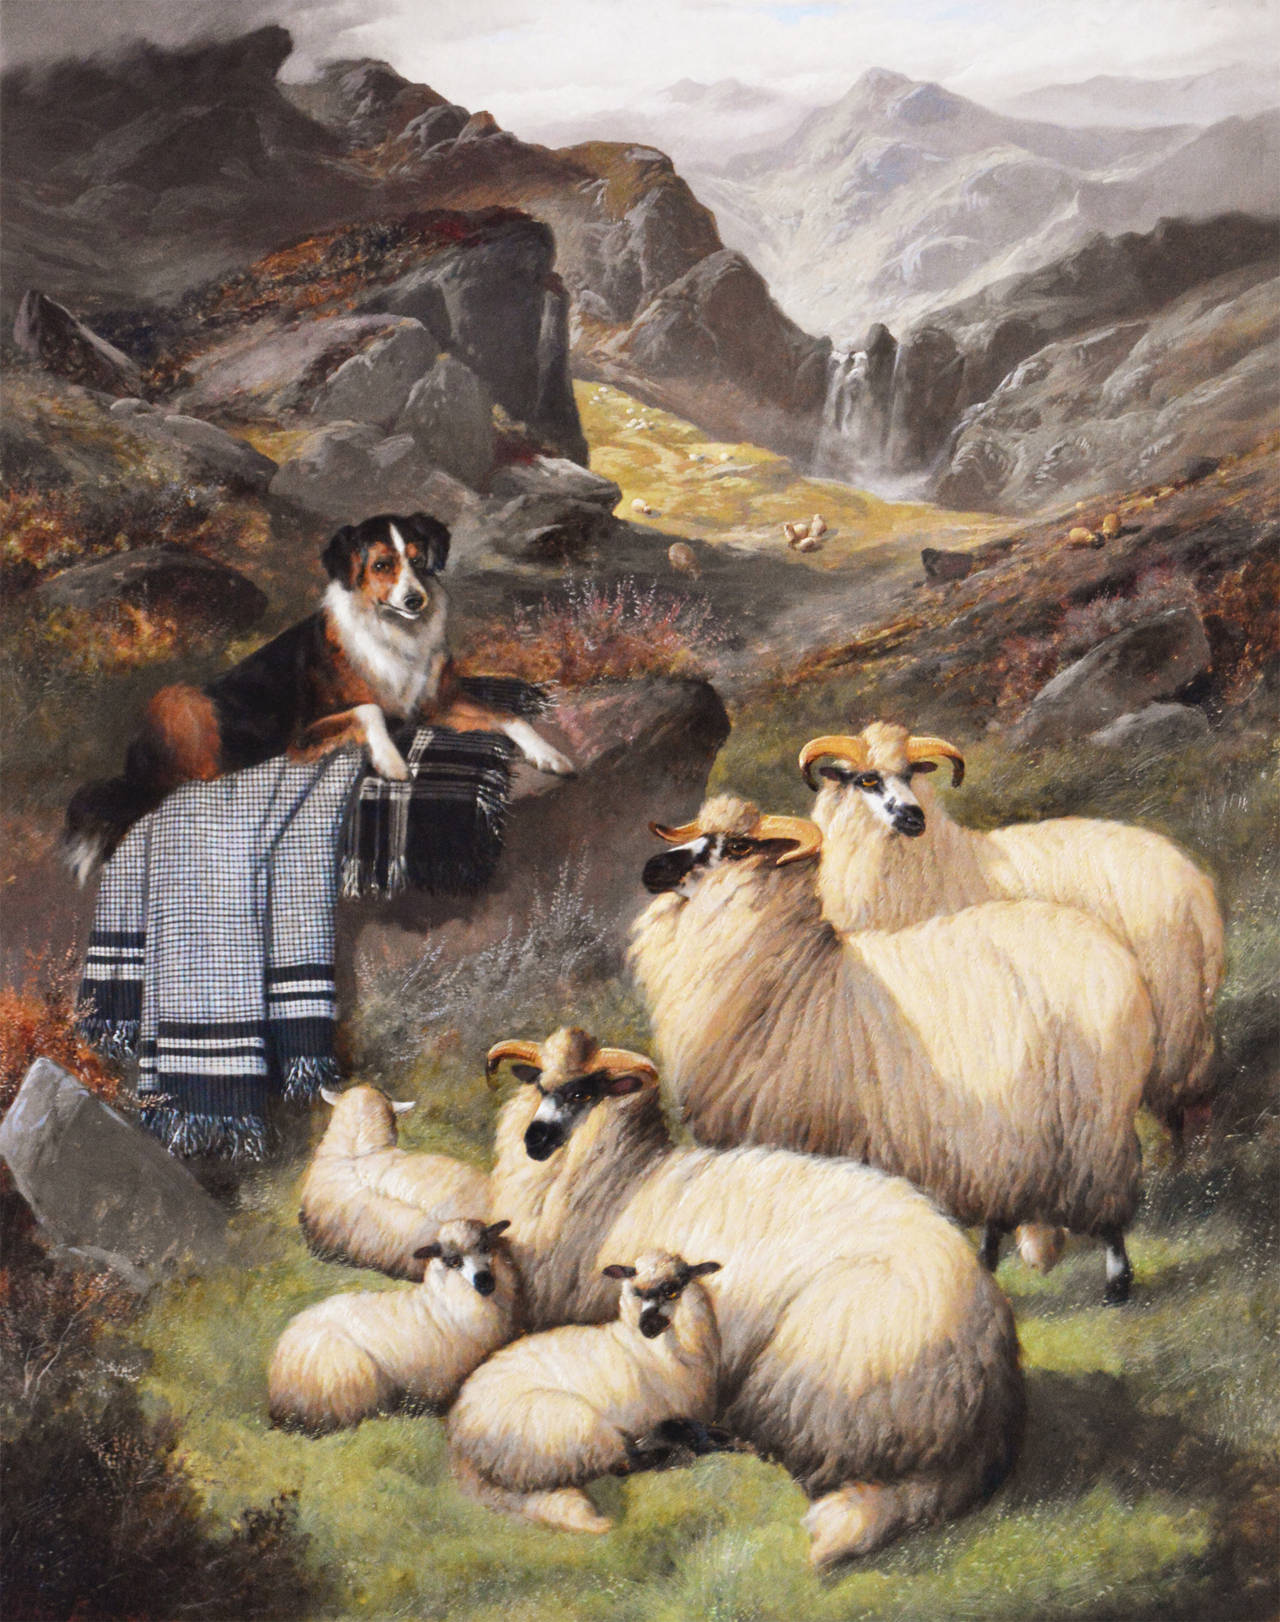 John Joseph Barker
British, (1811-1886)
Oil on canvas, signed
Image size: 50 inches x 40 inches 
Size including frame: 61 inches x 51 inches

A stunning, large scale painting of a sheepdog resting by a small flock of sheep, set against a